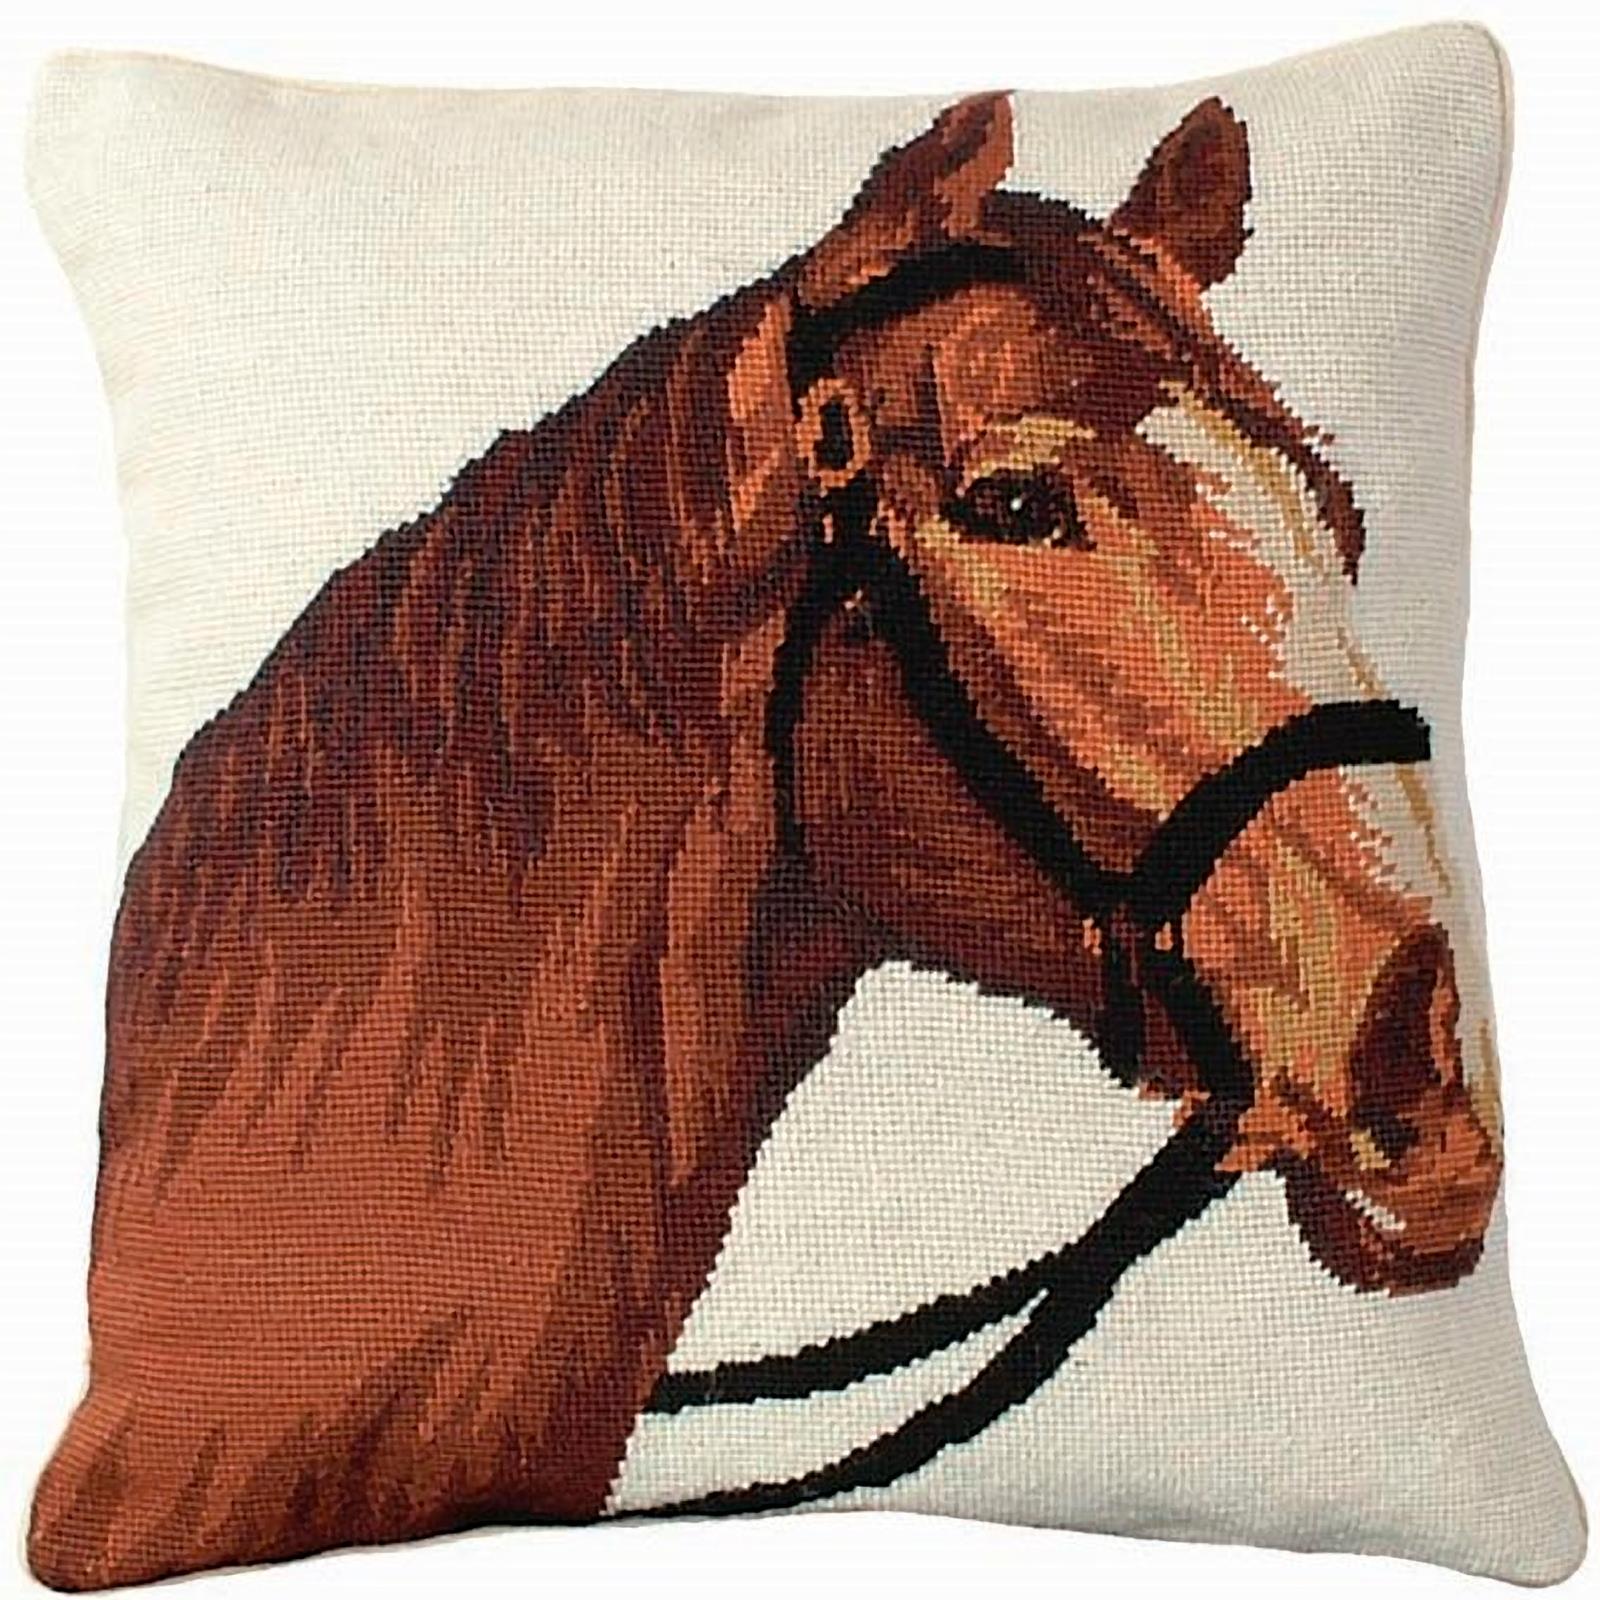 Throw Pillow Needlepoint Champ Horse 18x18 Chestnut Beige Poly Insert Cotton-Image 2